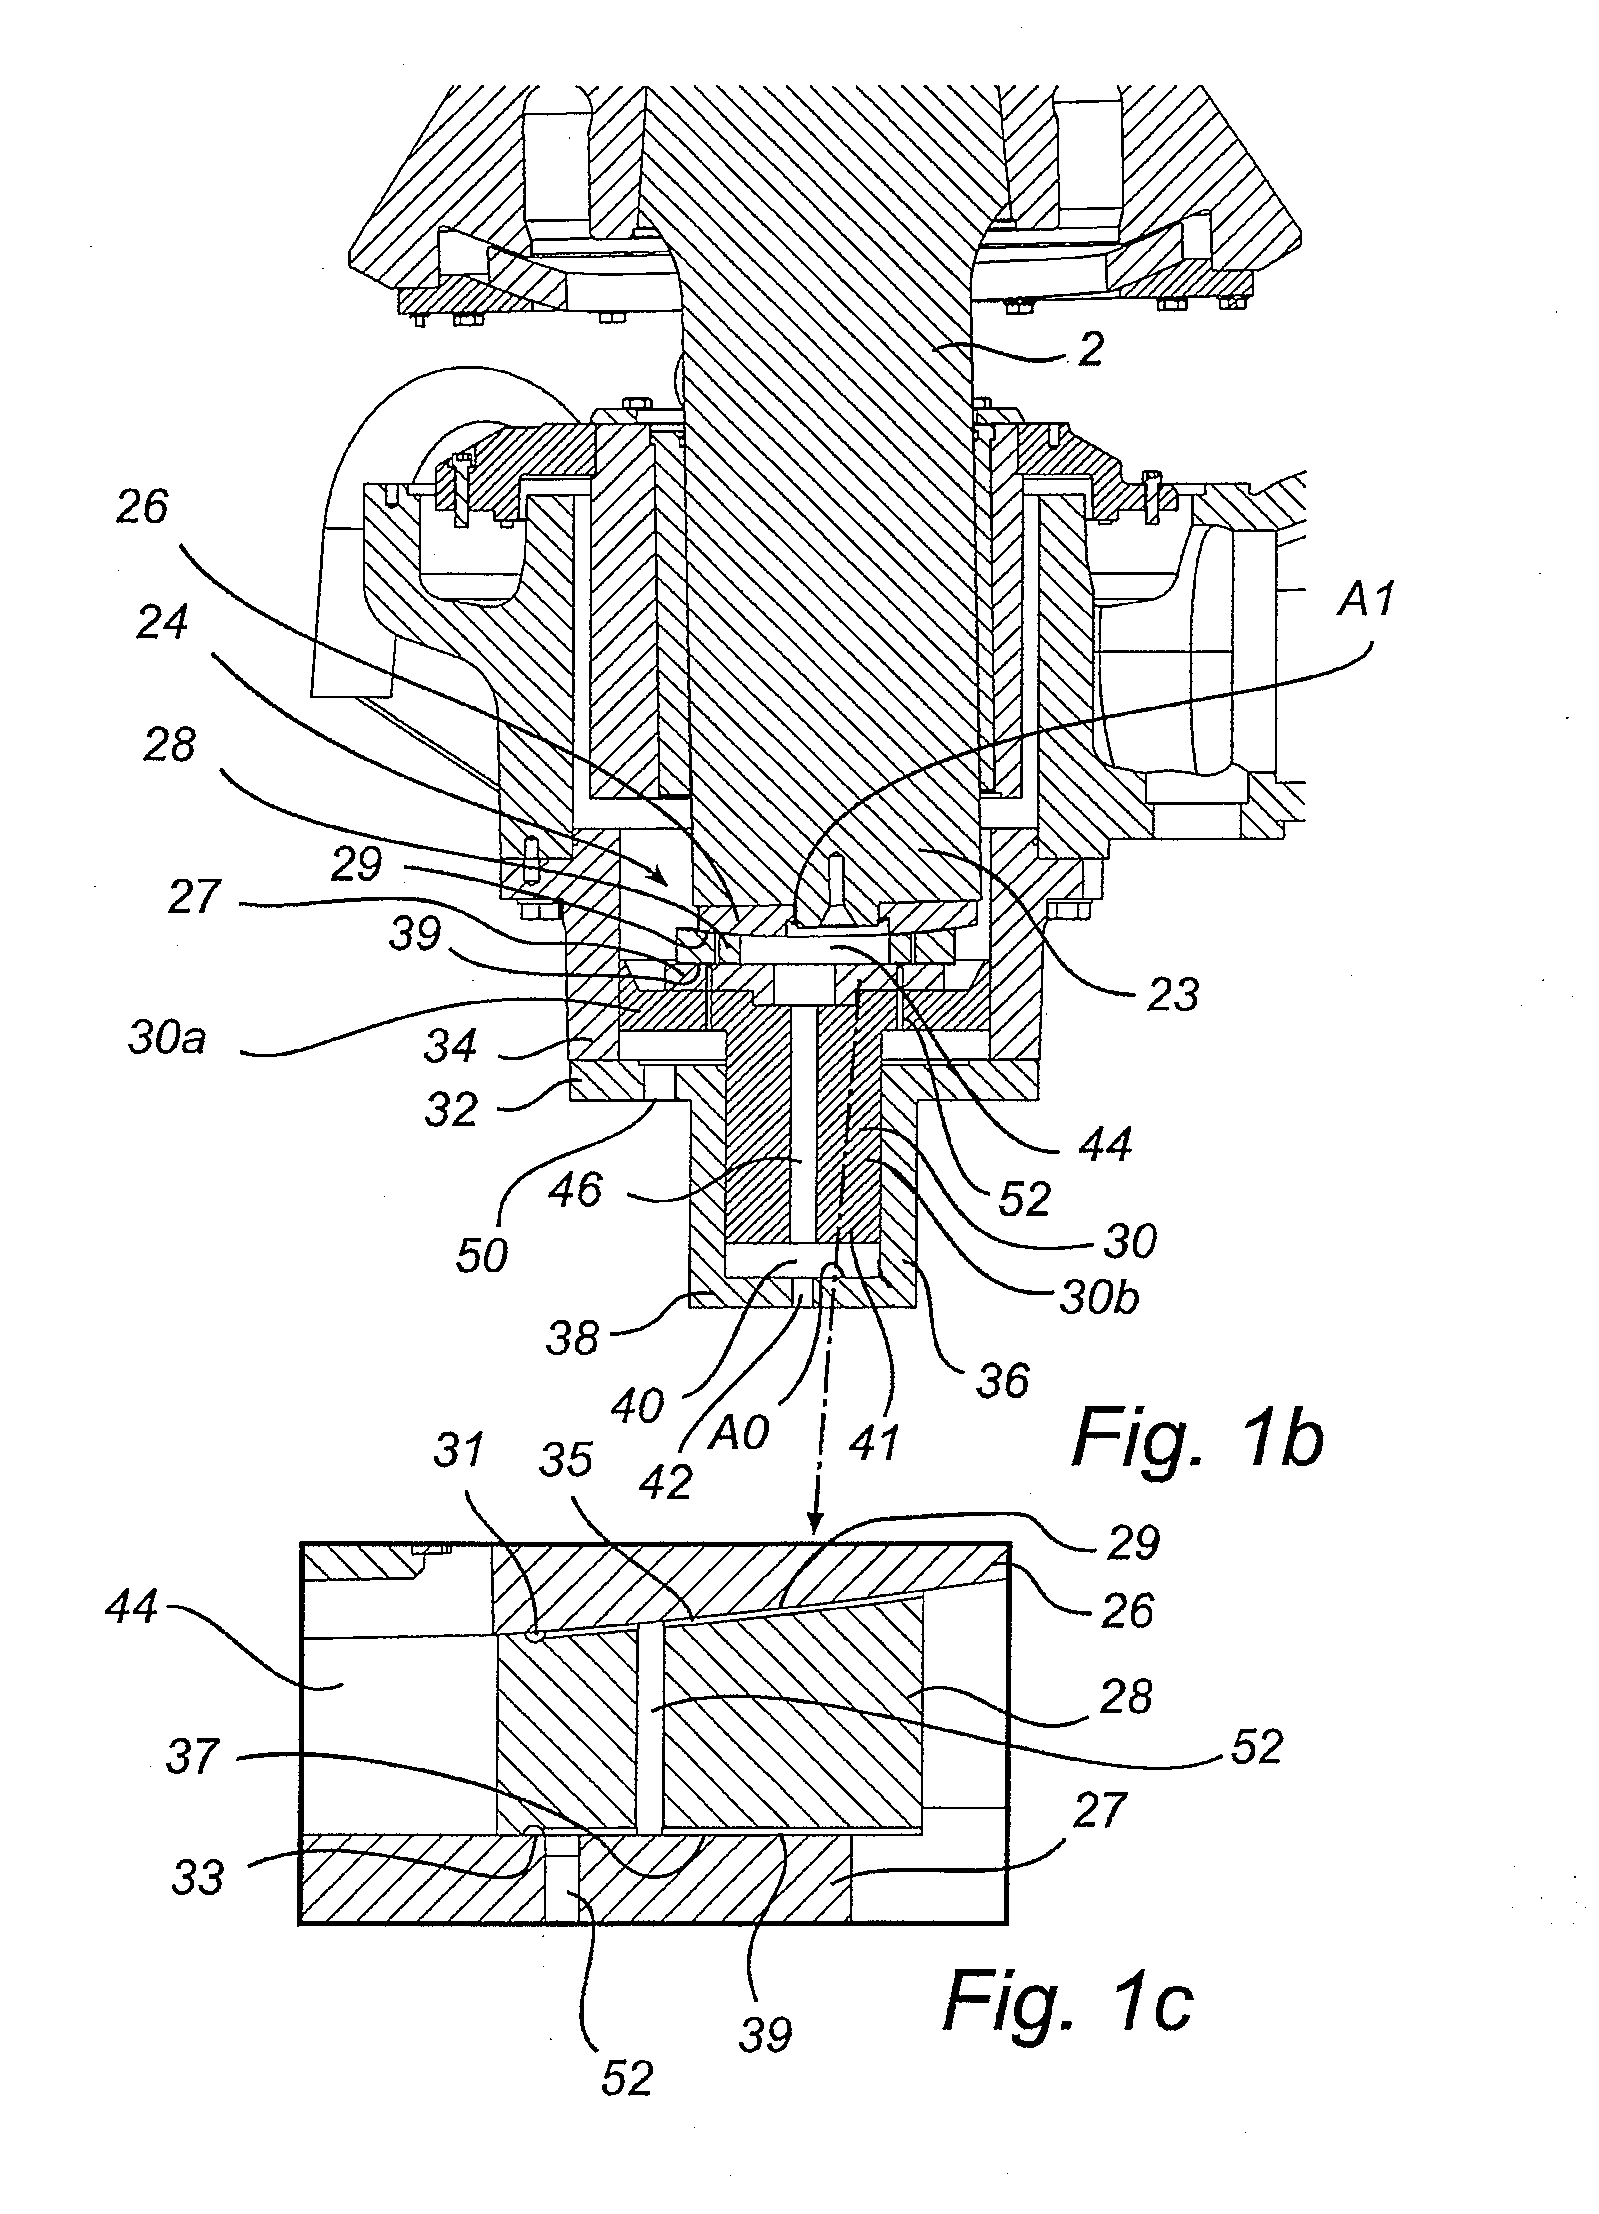 Thrust bearing for a gyratory crusher and method of supporting a vertical shaft in such a crusher